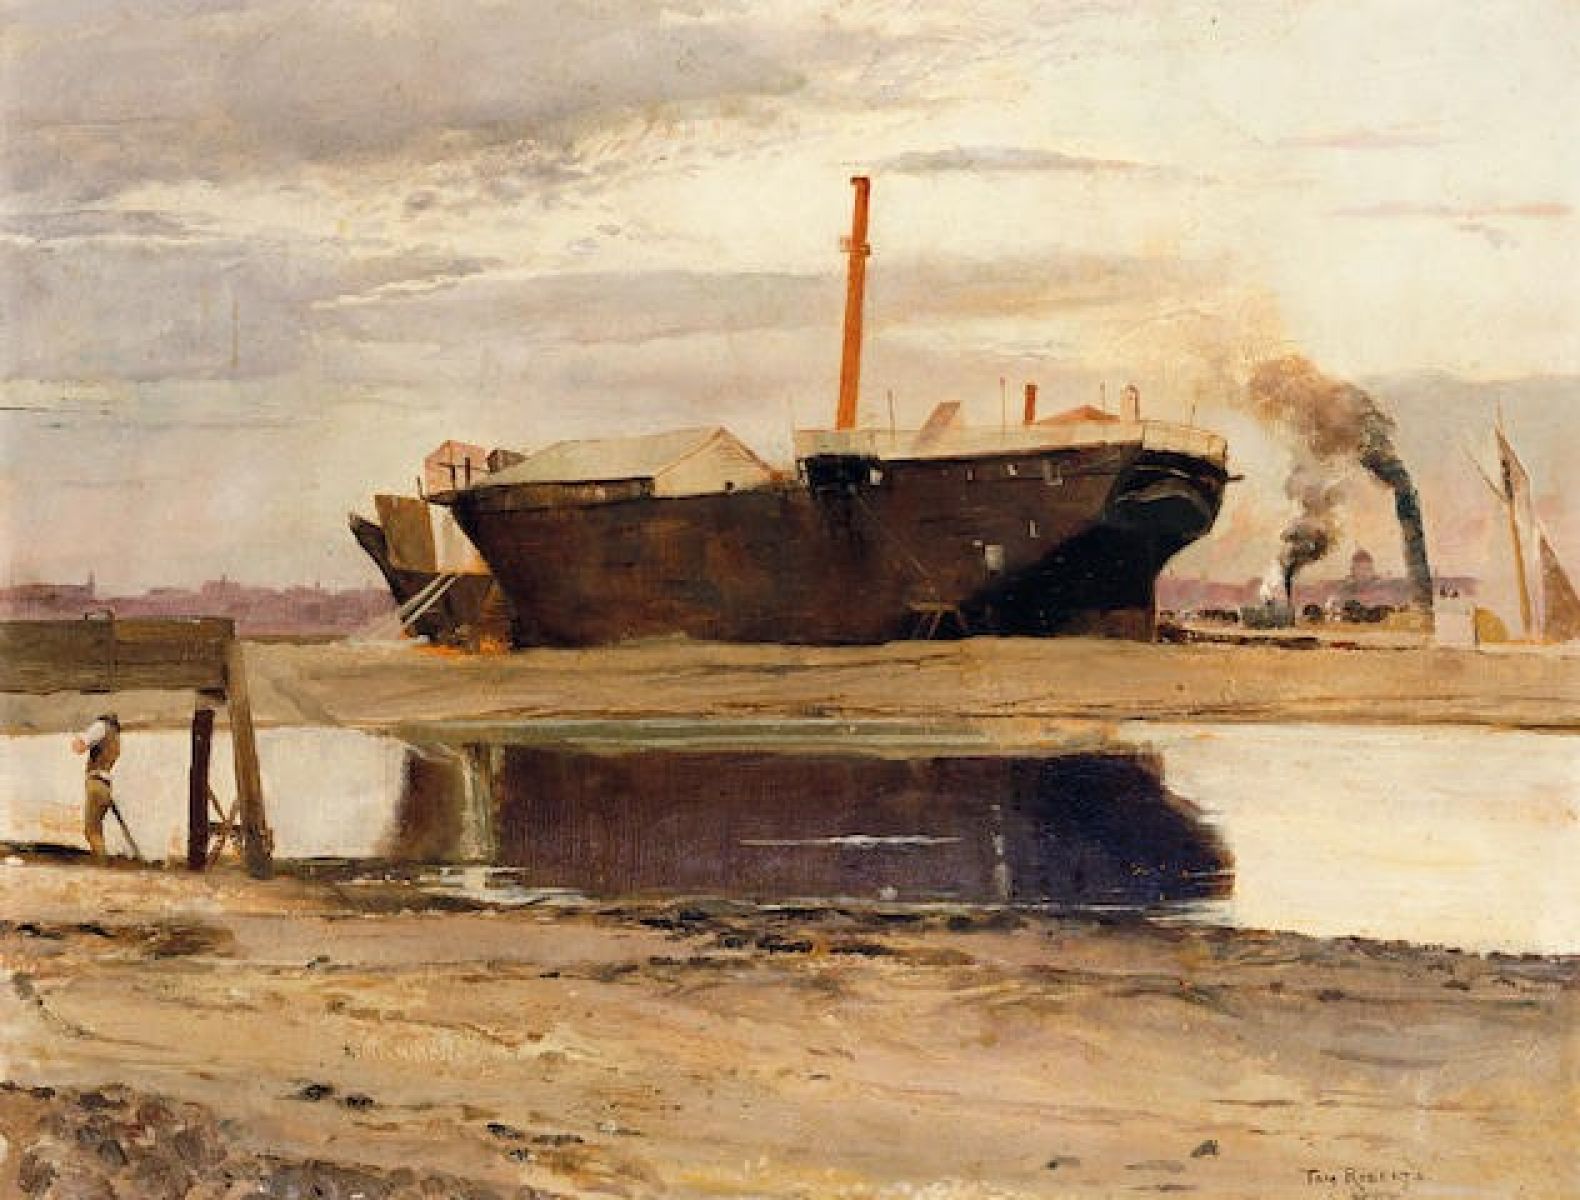 The image is a paiting by Tom Roberts ''The Old Sacramento 1885''. In the drawing the ship can be seen stationed on a large sand bank. A person is working beside the ship and smoke can be seen coming out from behind the ship. 